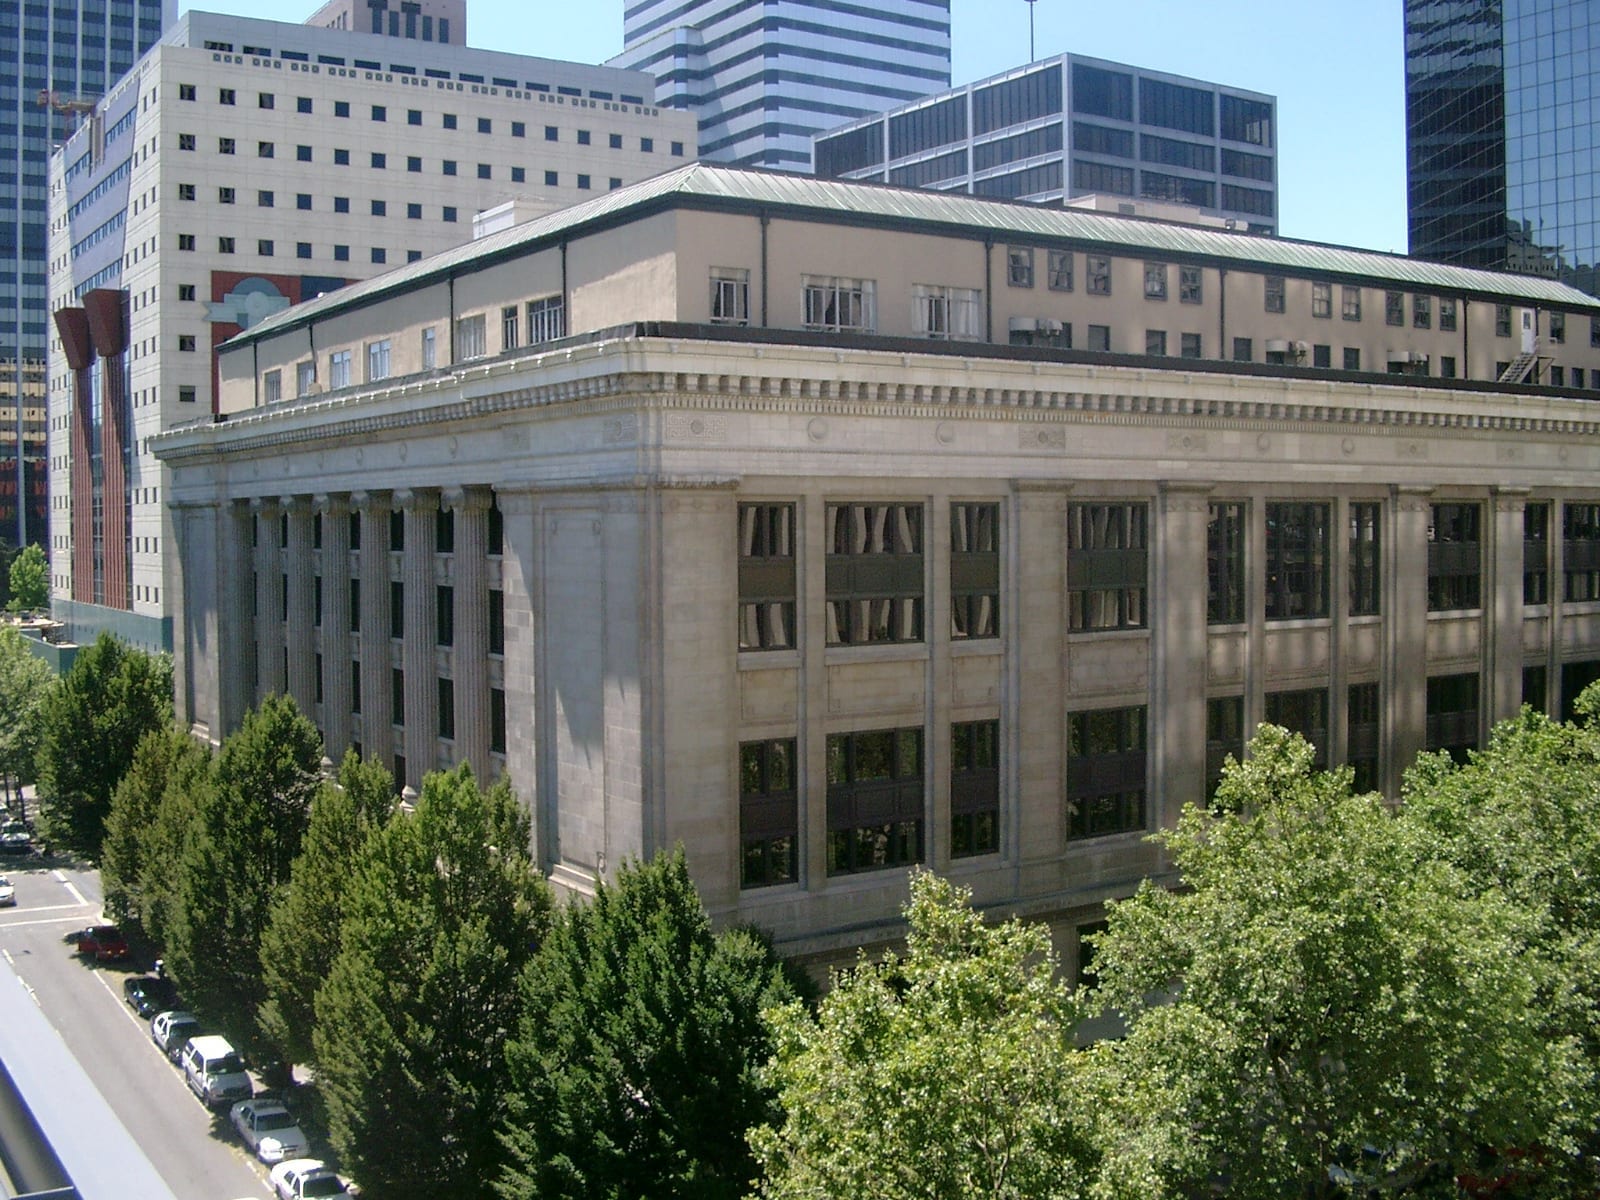 Image of the Multnomah County Courthouse